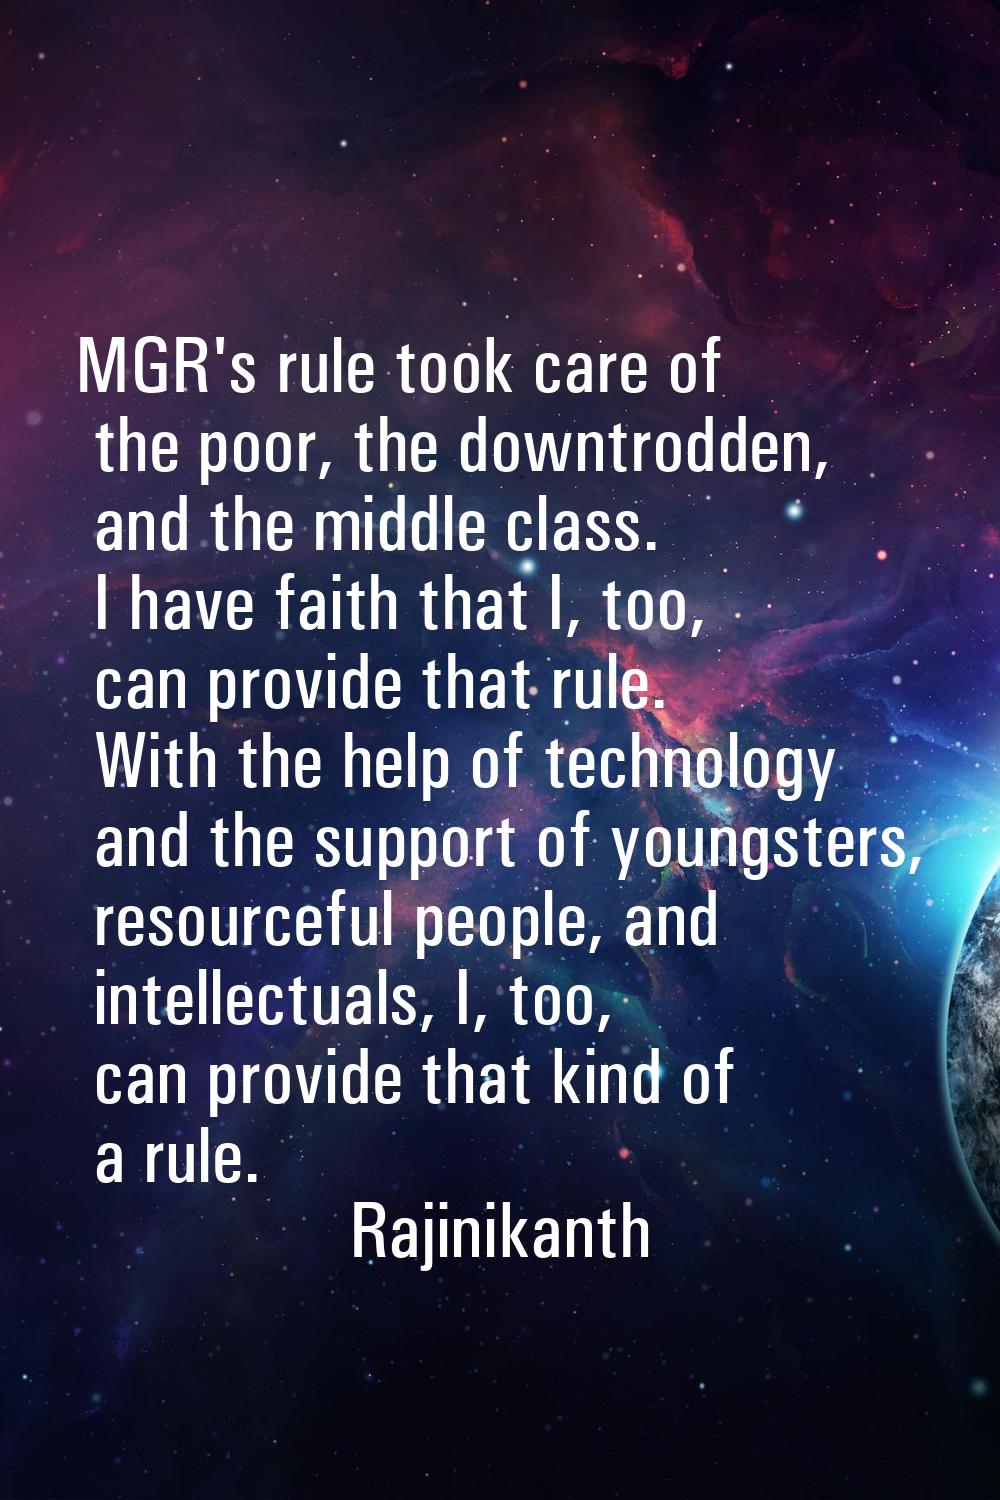 MGR's rule took care of the poor, the downtrodden, and the middle class. I have faith that I, too, 